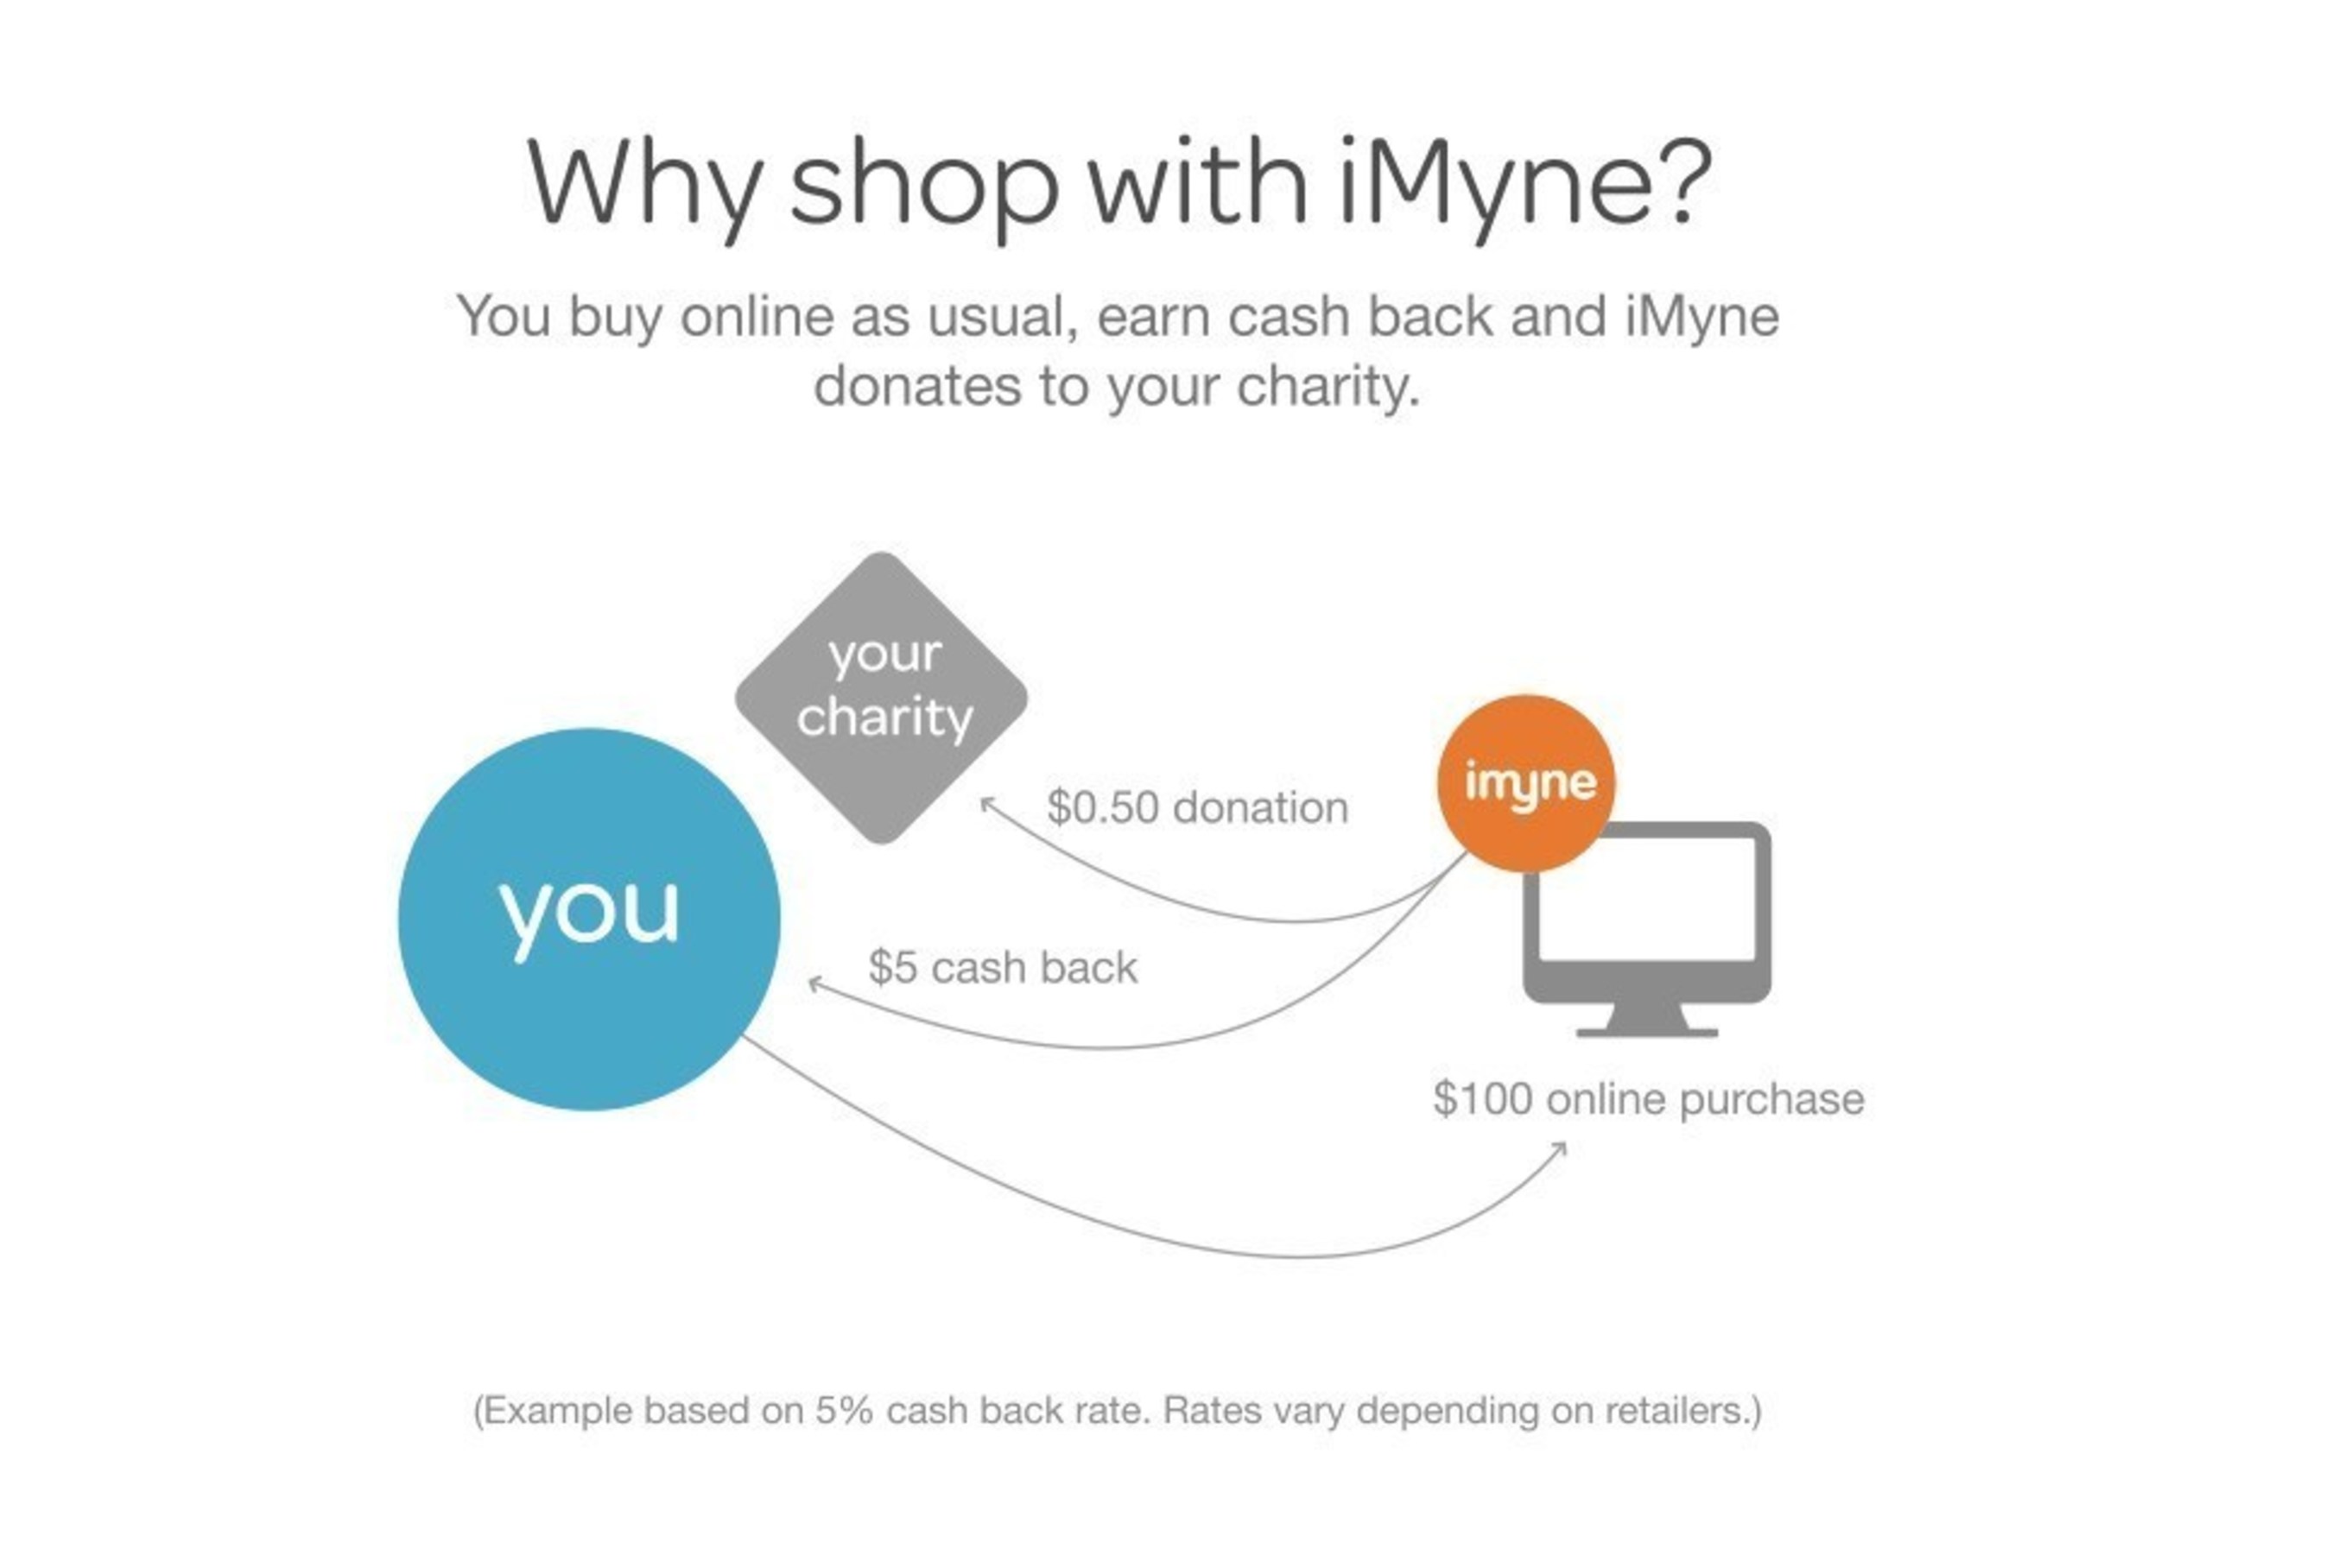 Why shop with iMyne?